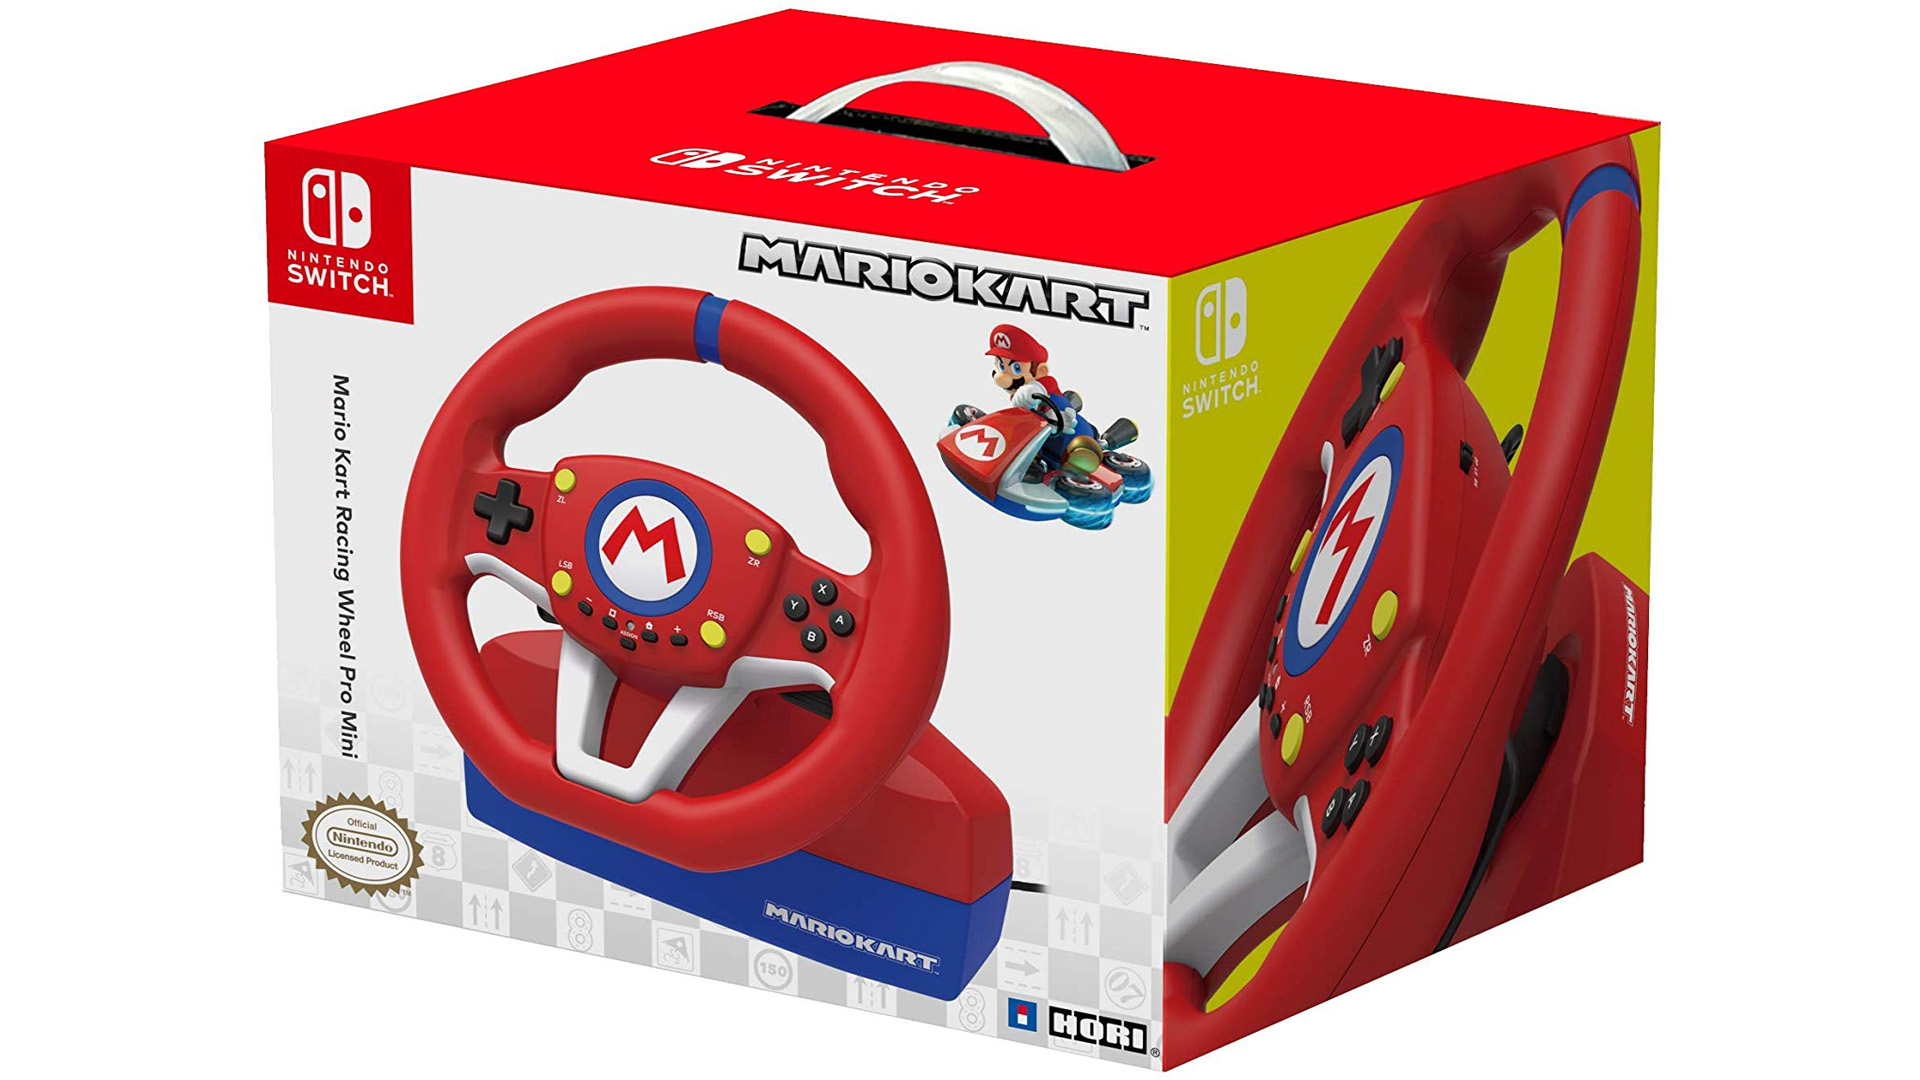 steering wheel for switch